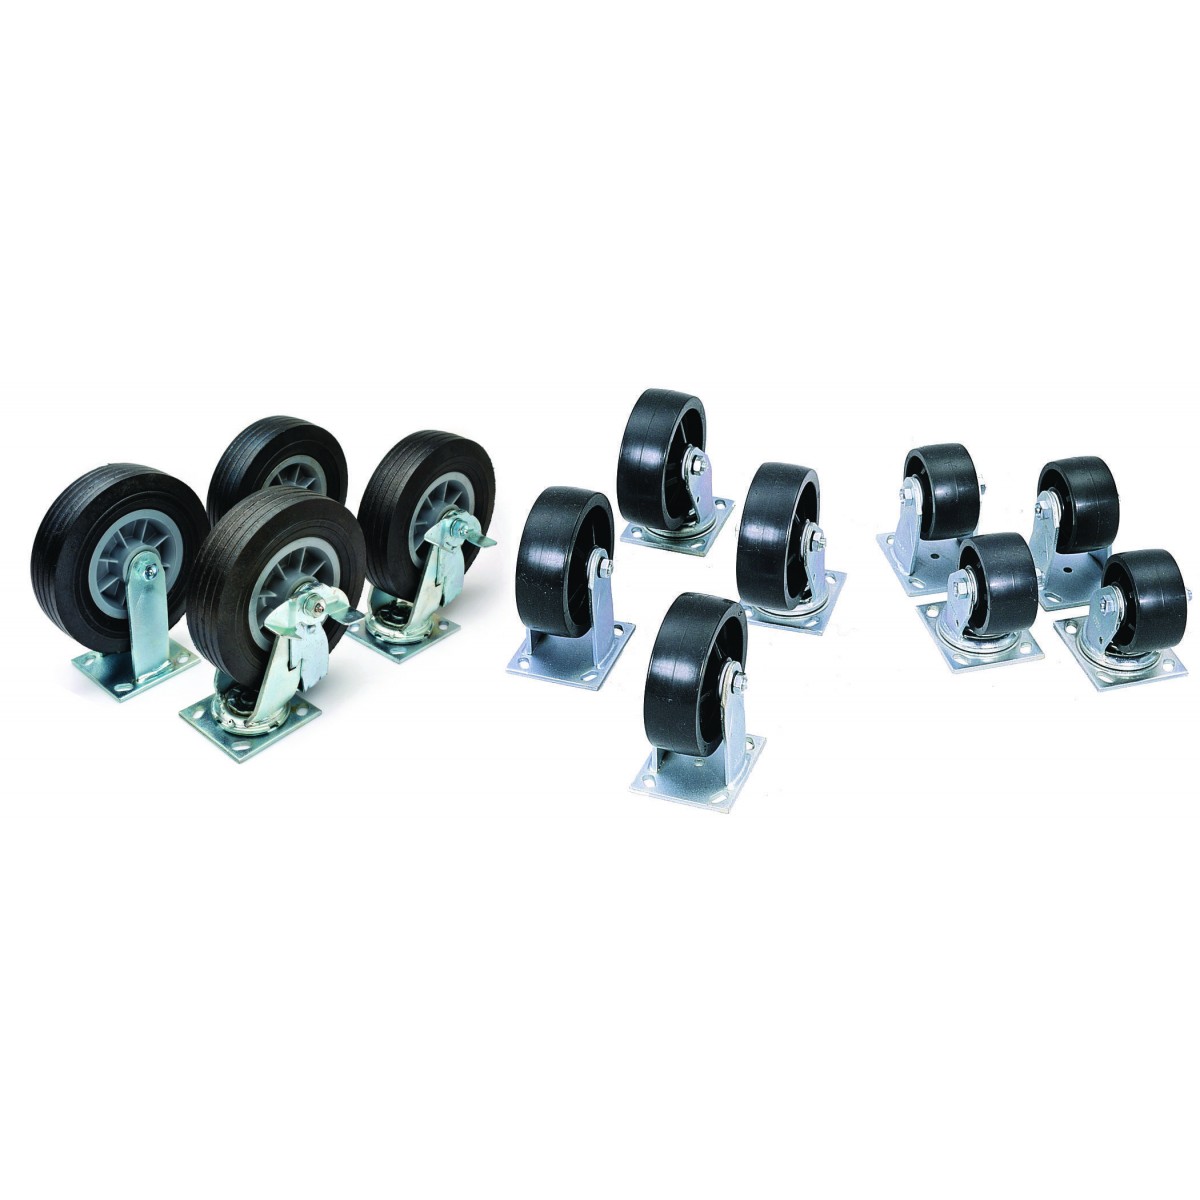 6 in. Casters - Set of 4 (2 Swivel and 2 Fixed) Image